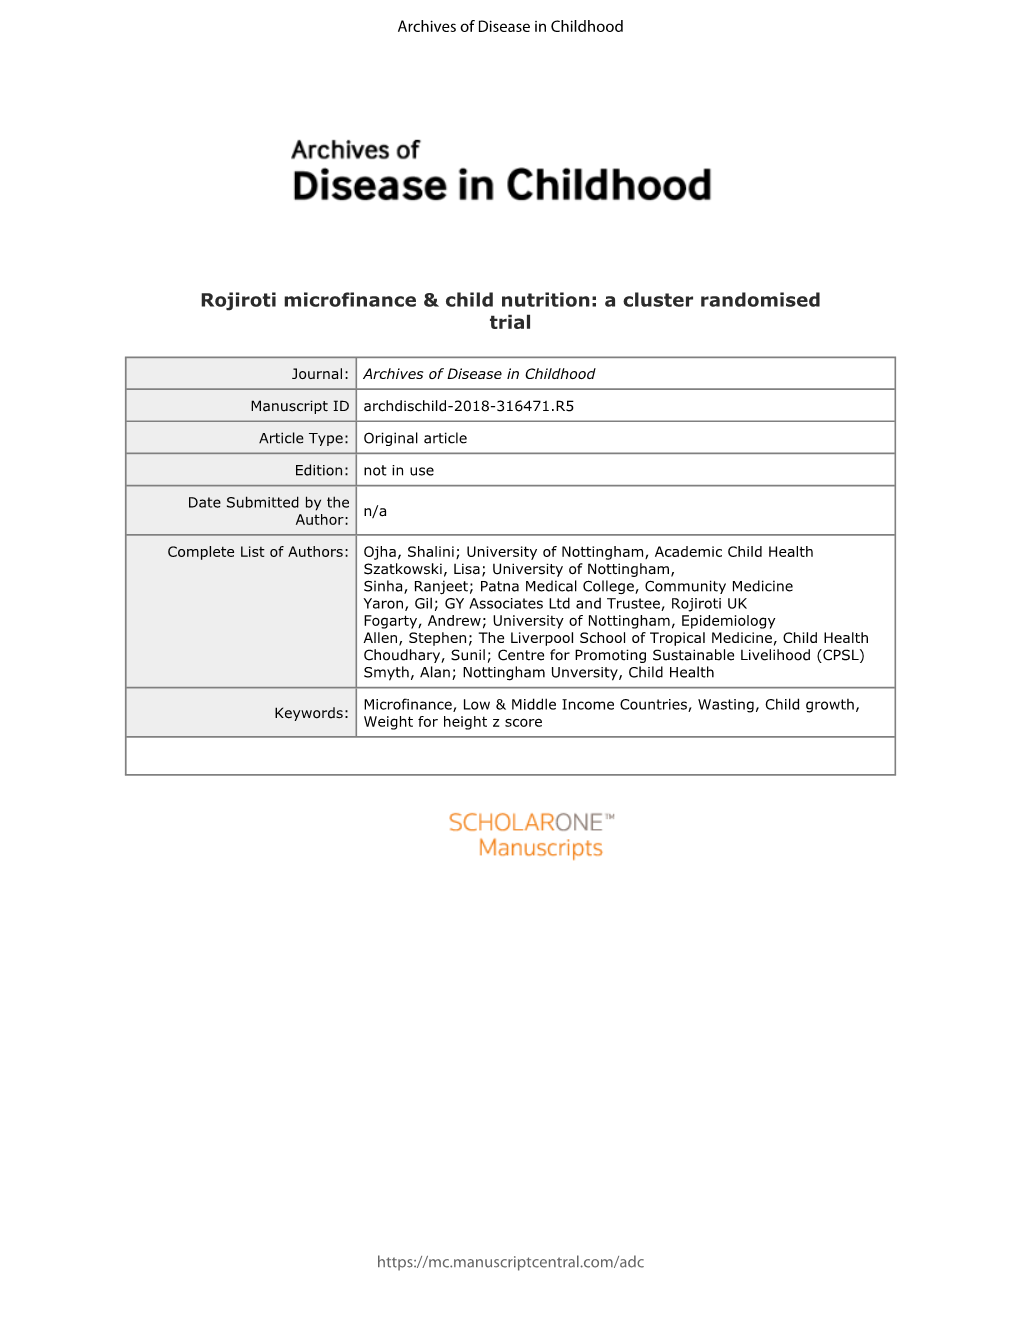 Confidential: for Review Only Rojiroti Microfinance & Child Nutrition: a Cluster Randomised Trial